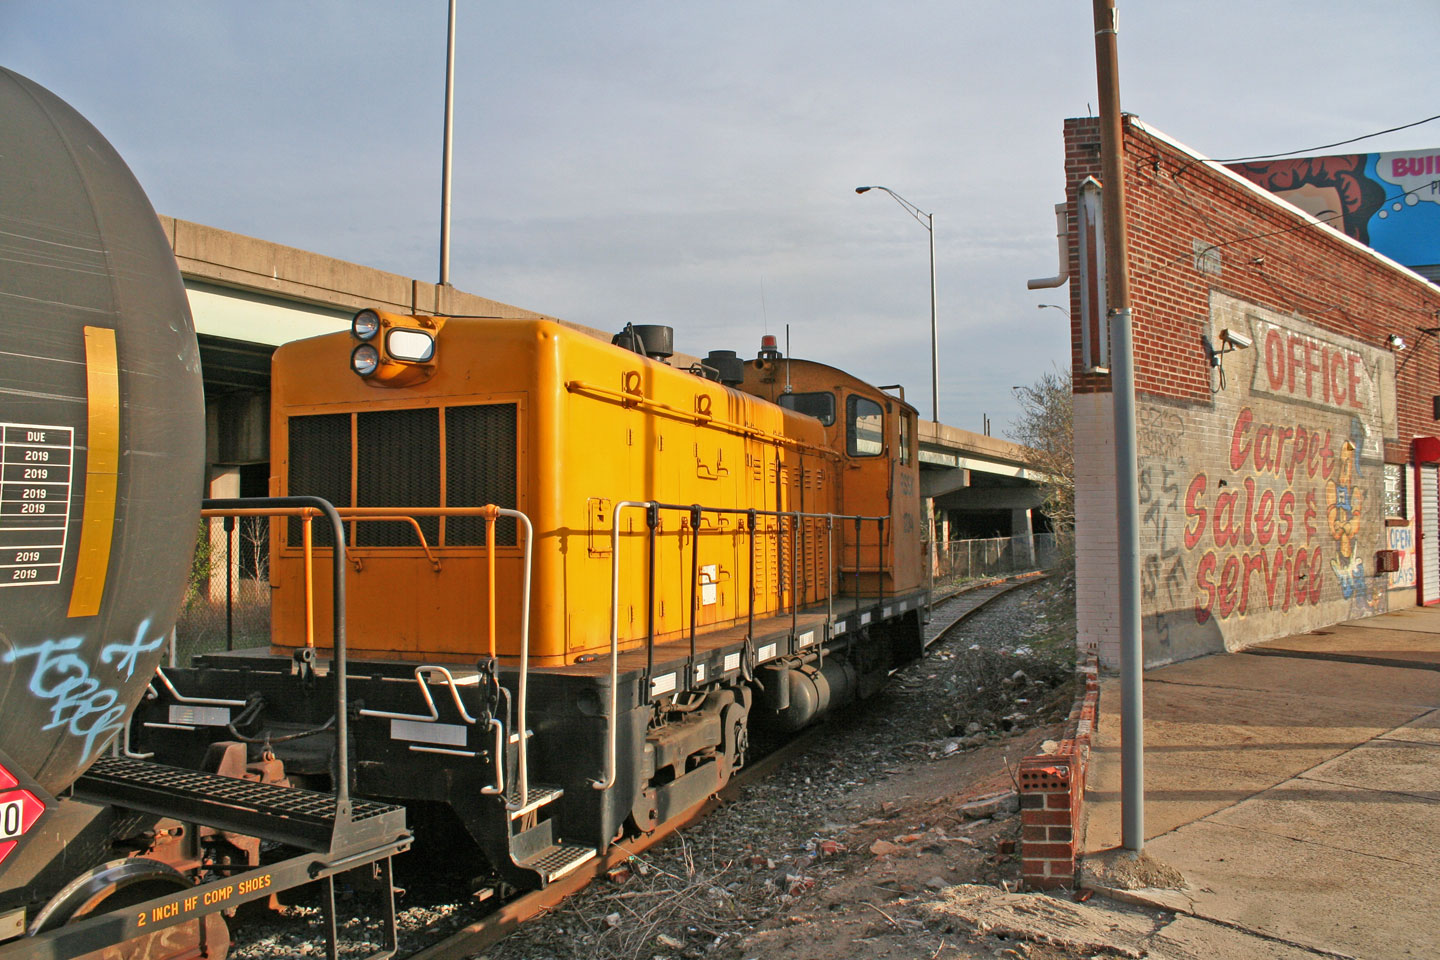 Railserve 1234 comes into view behind the oddly shaped carpet company on Aramingo Avenue.